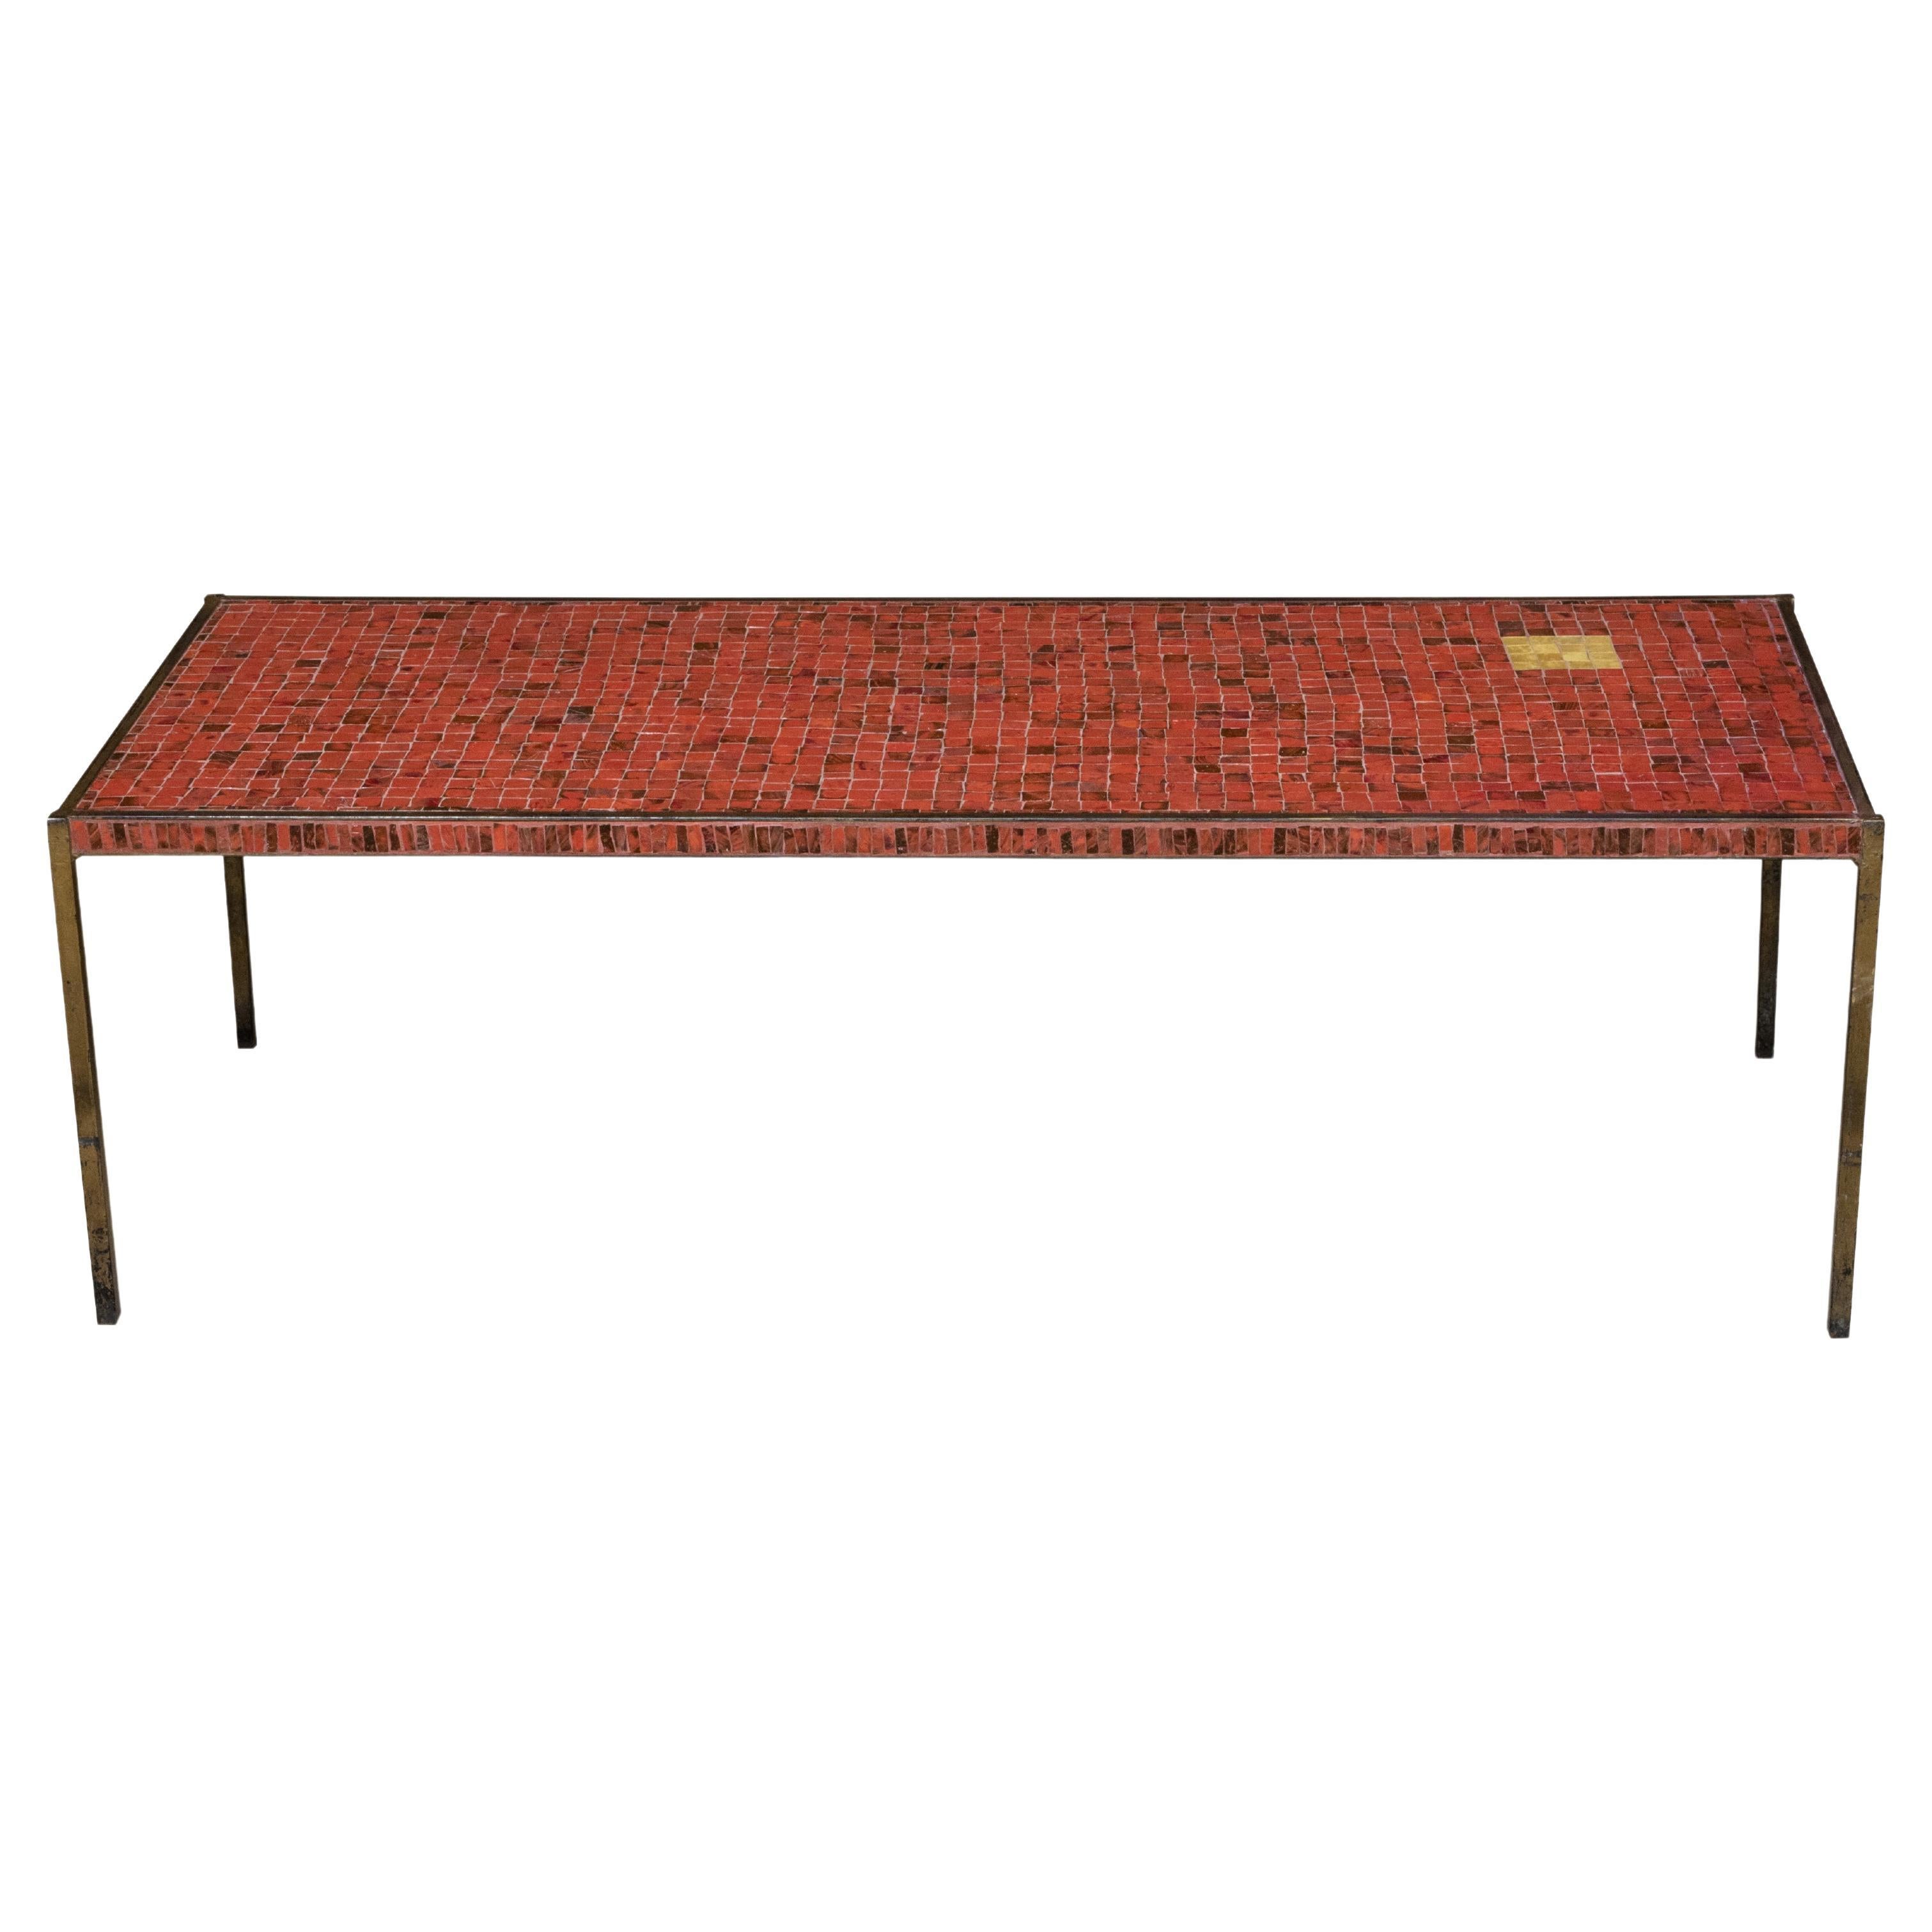 Midcentury Italian Mosaic Table with Iron Base and Red Glass Tile Style Top